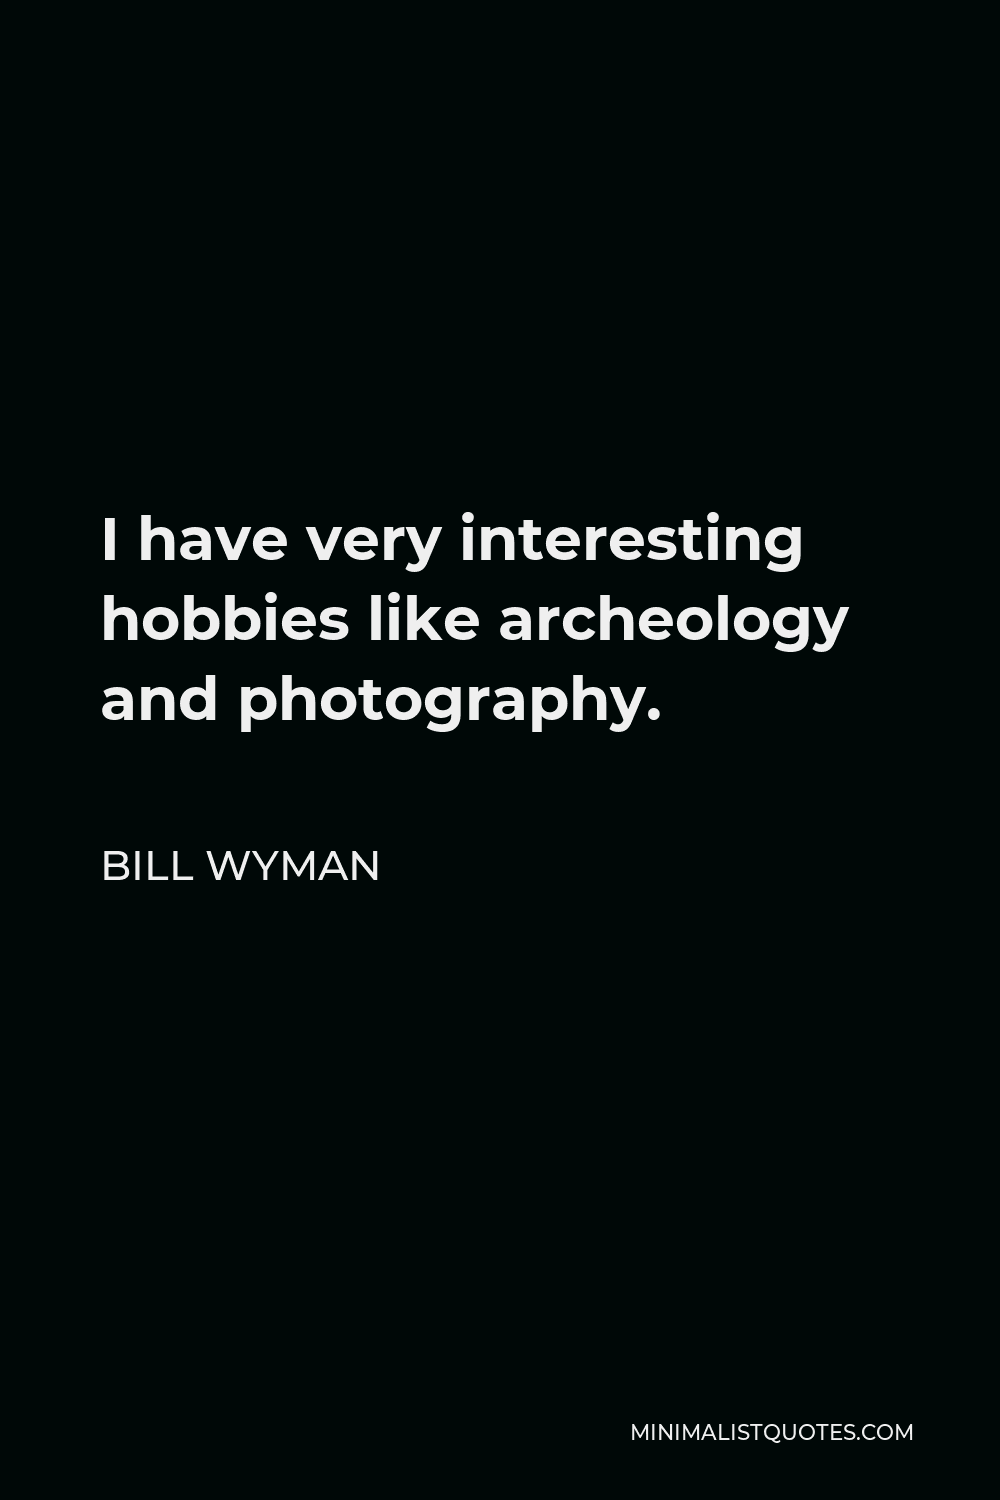 Bill Wyman Quote - I have very interesting hobbies like archeology and photography.